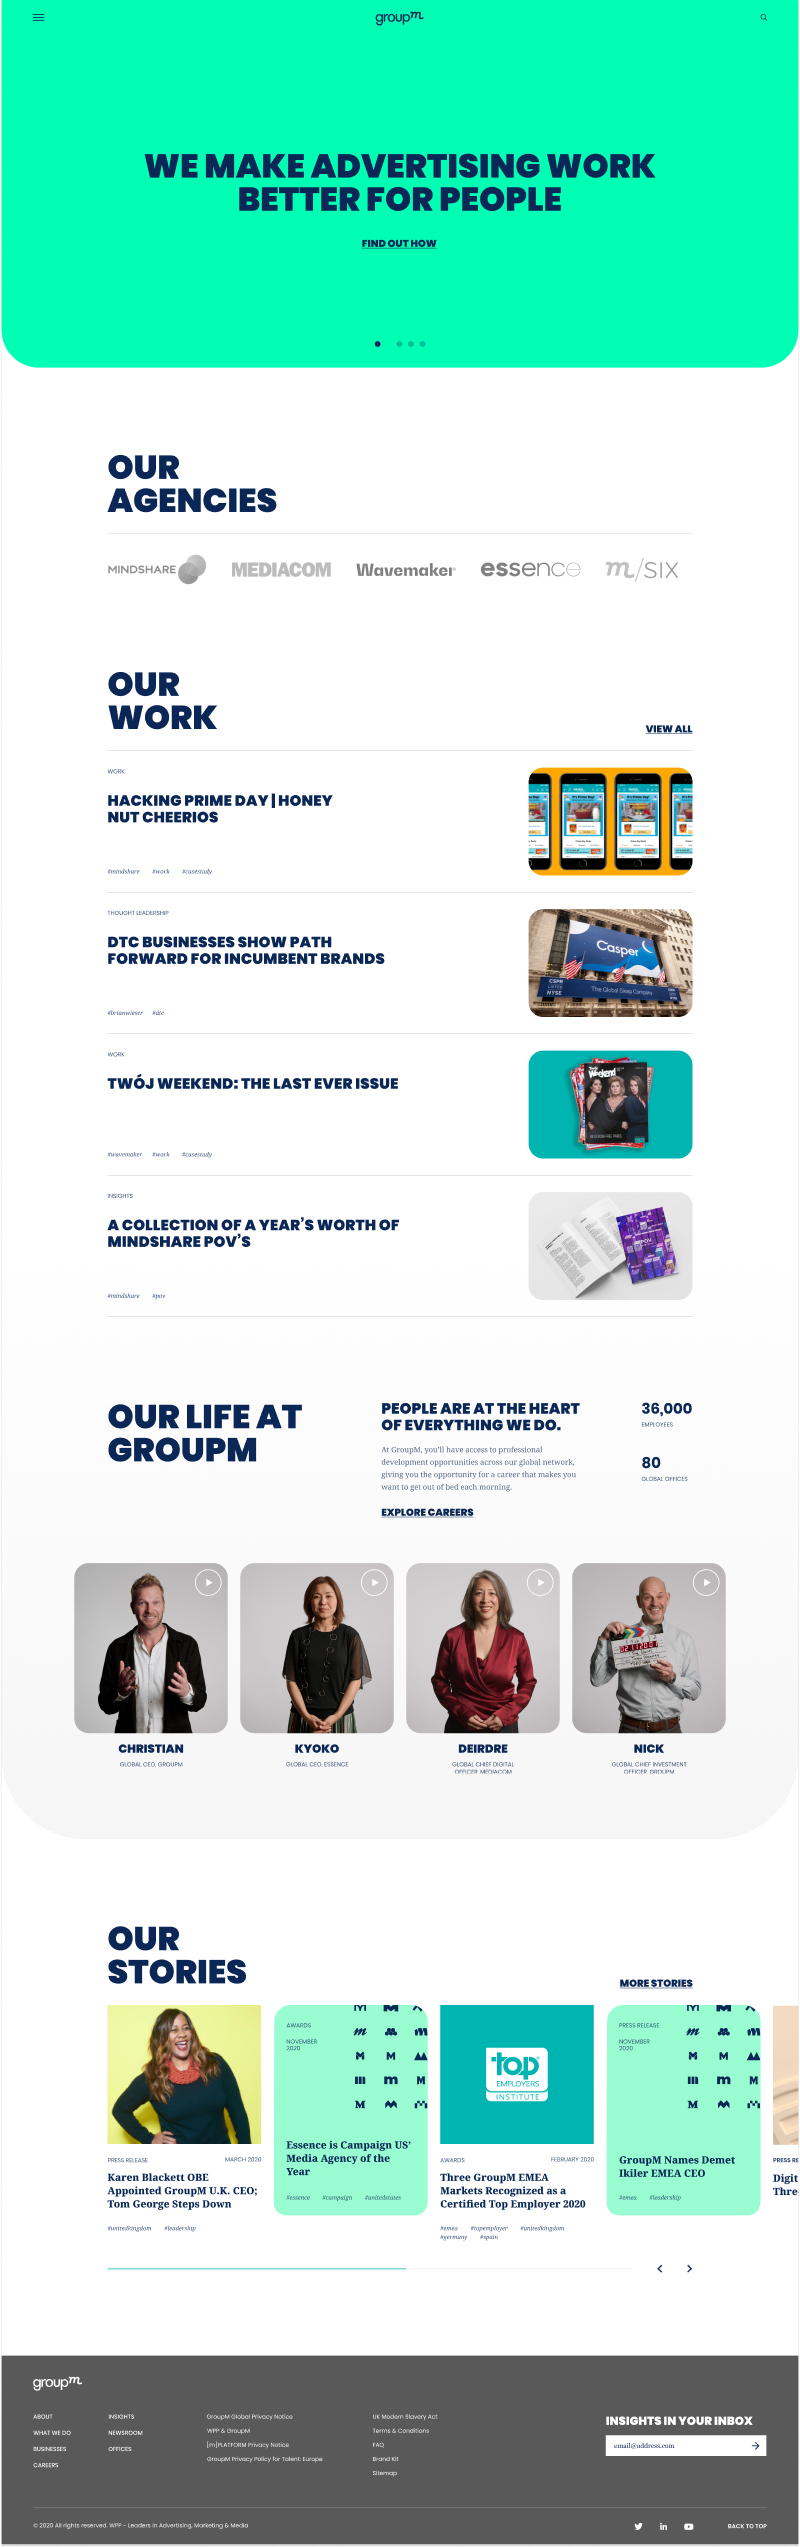 GroupM's Home Page Design and Development